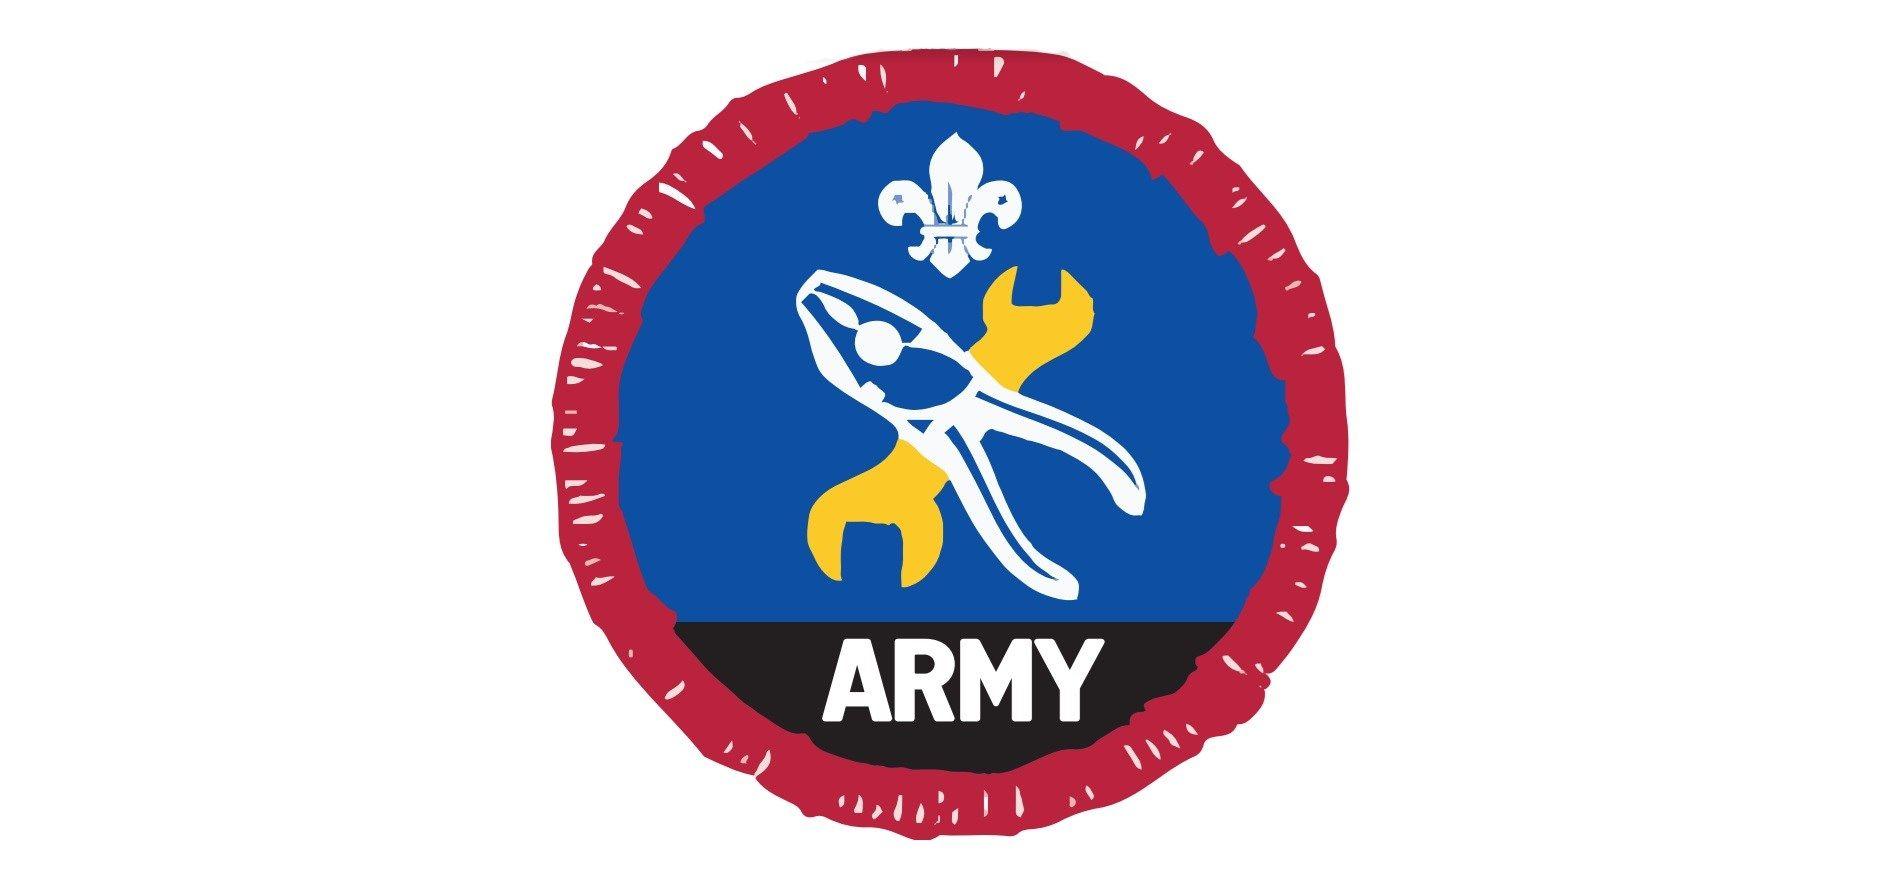 Army Mechanic Logo - The British Army launches its Scouts' Mechanic Badge | The British Army